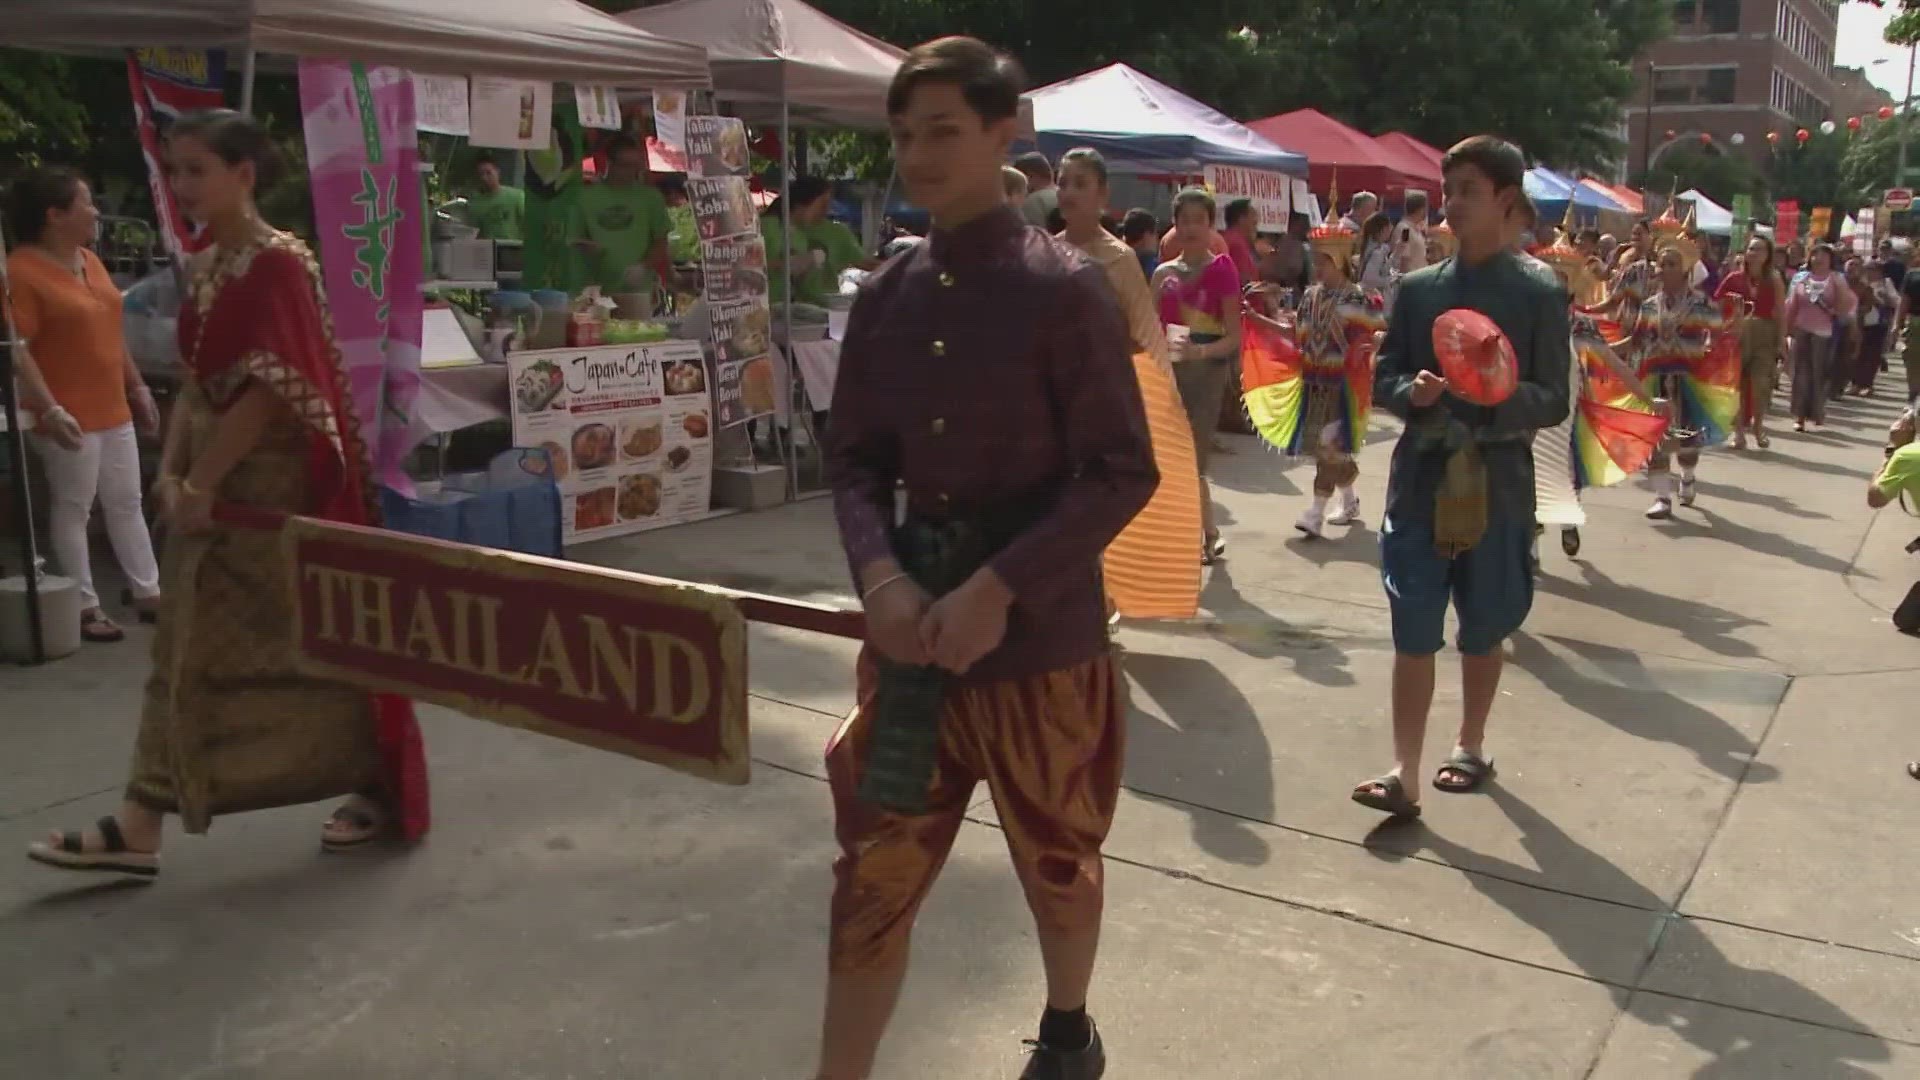 The first Knox Asian Festival took place in 2013 at Krutch Park with initially only 20 tents.